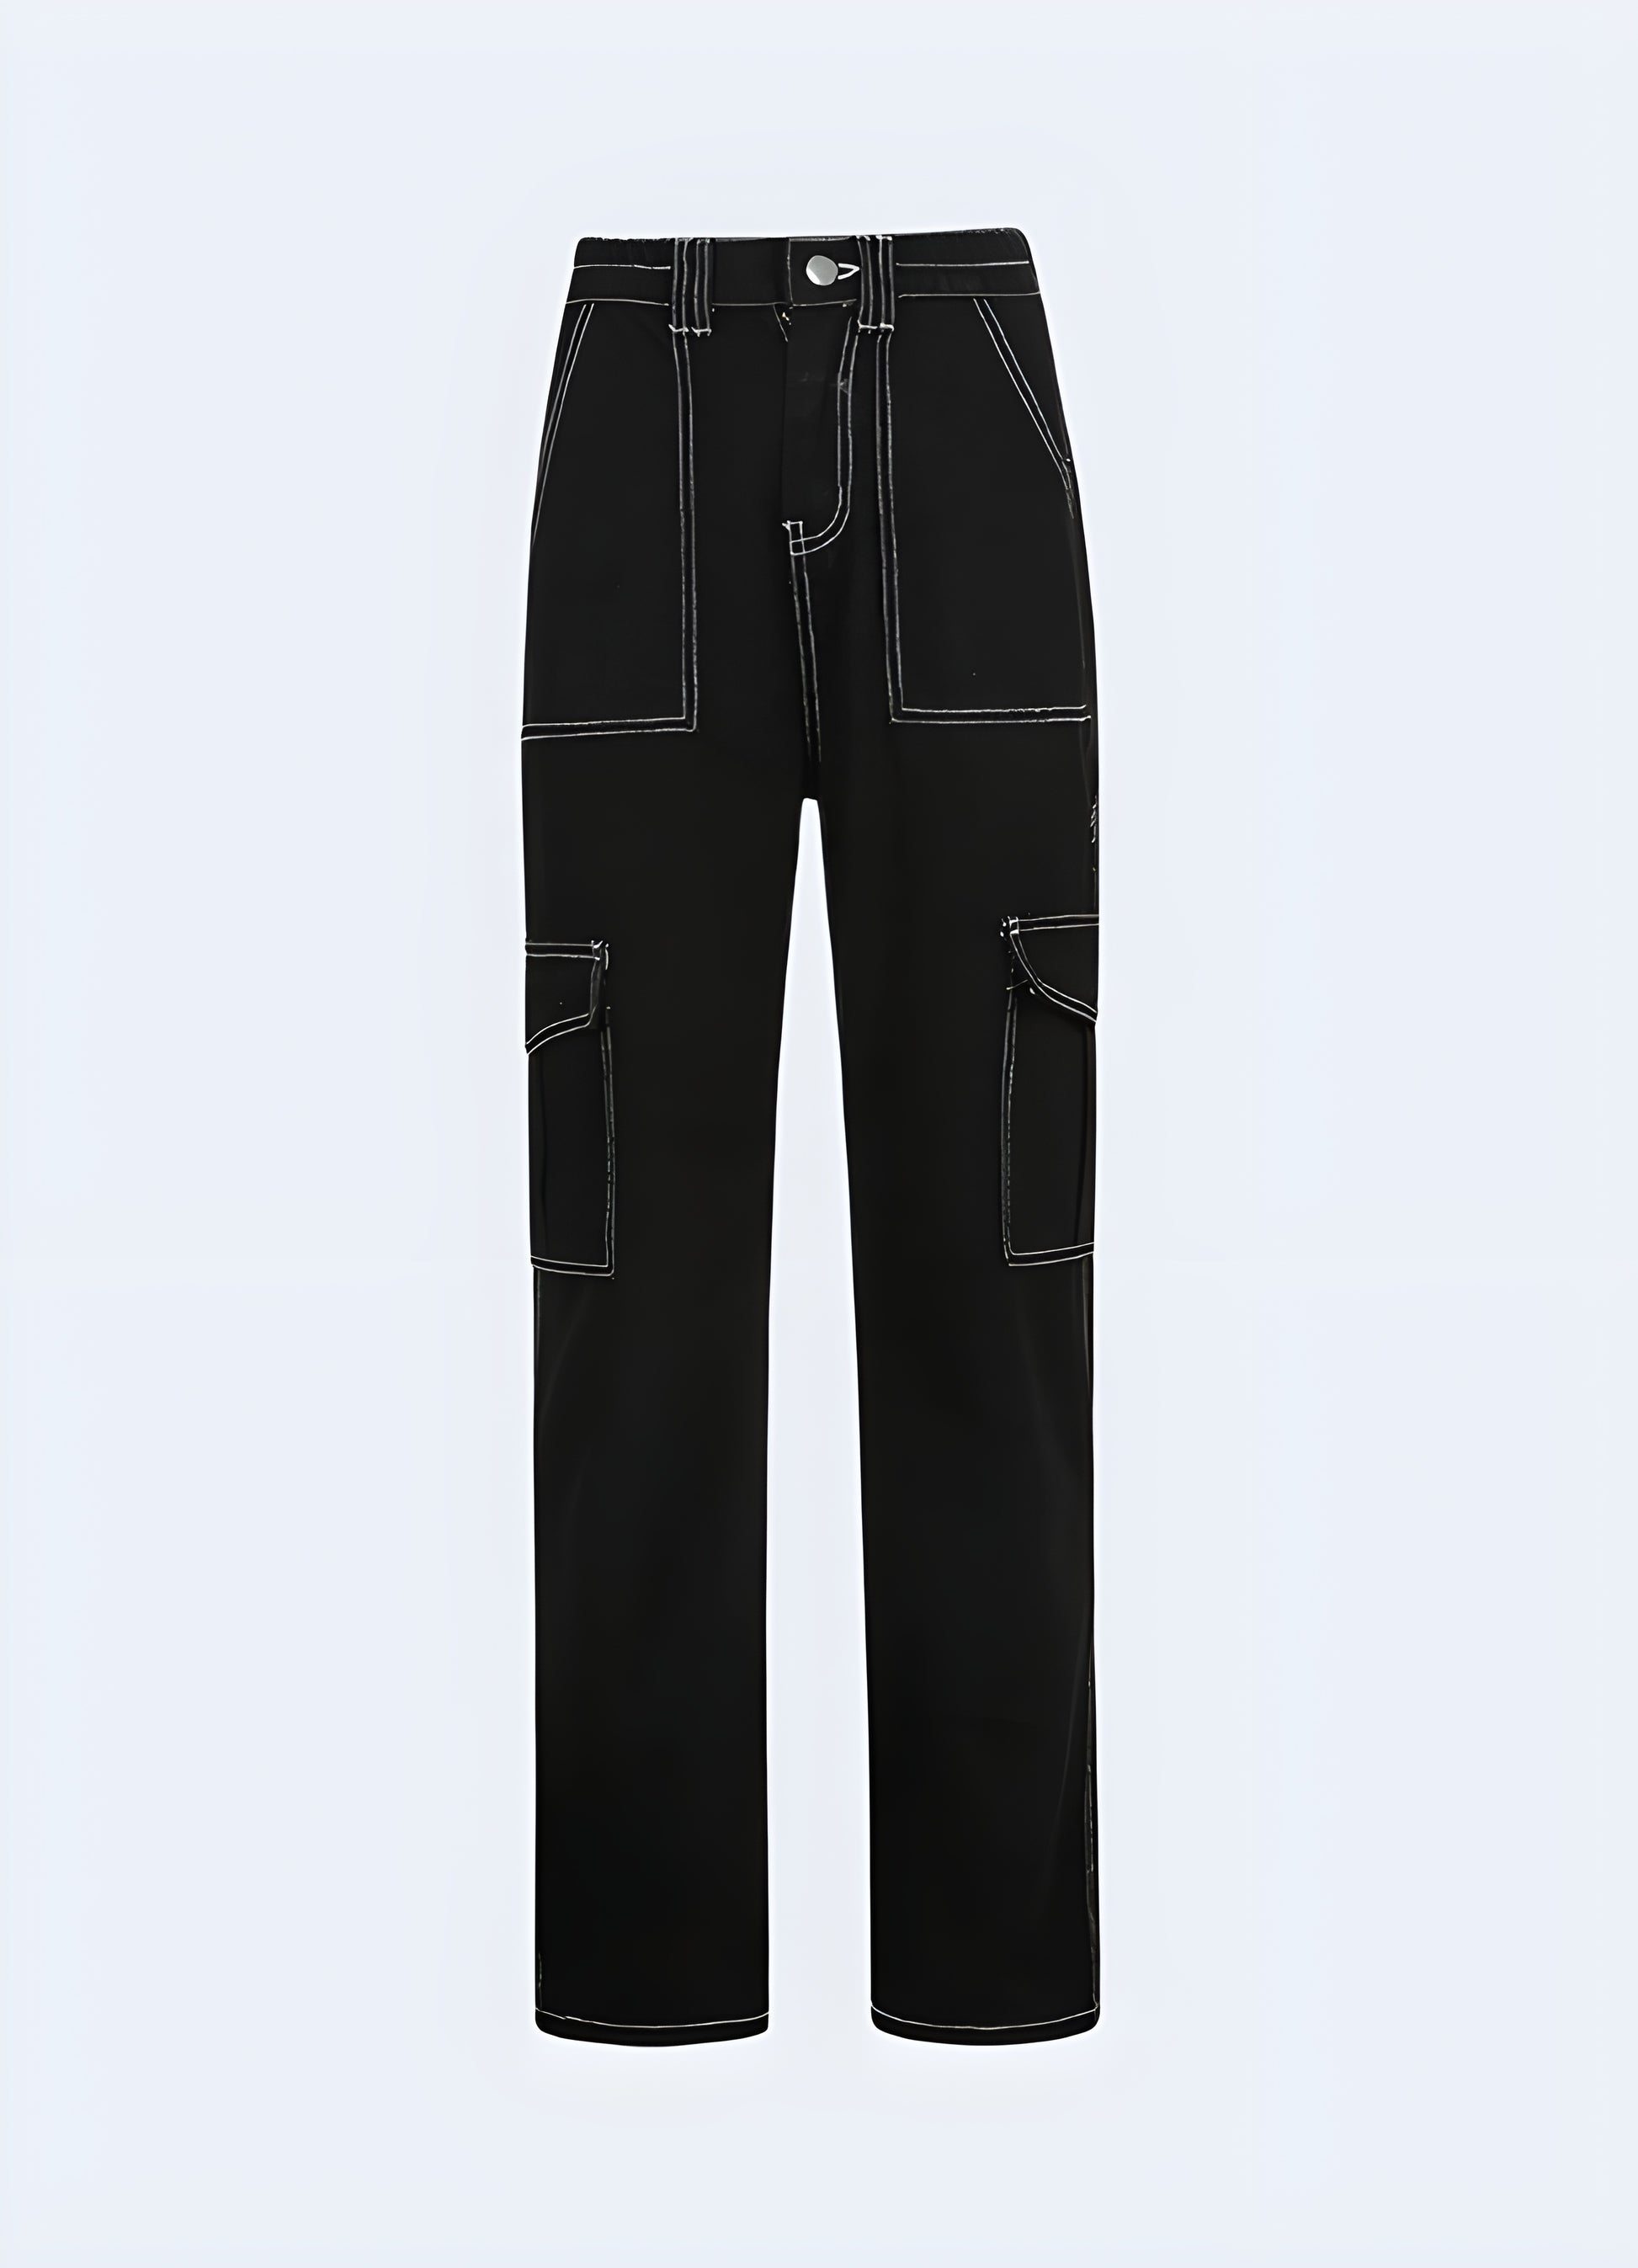 Elevate your casual look with these sleek black cargo pants.